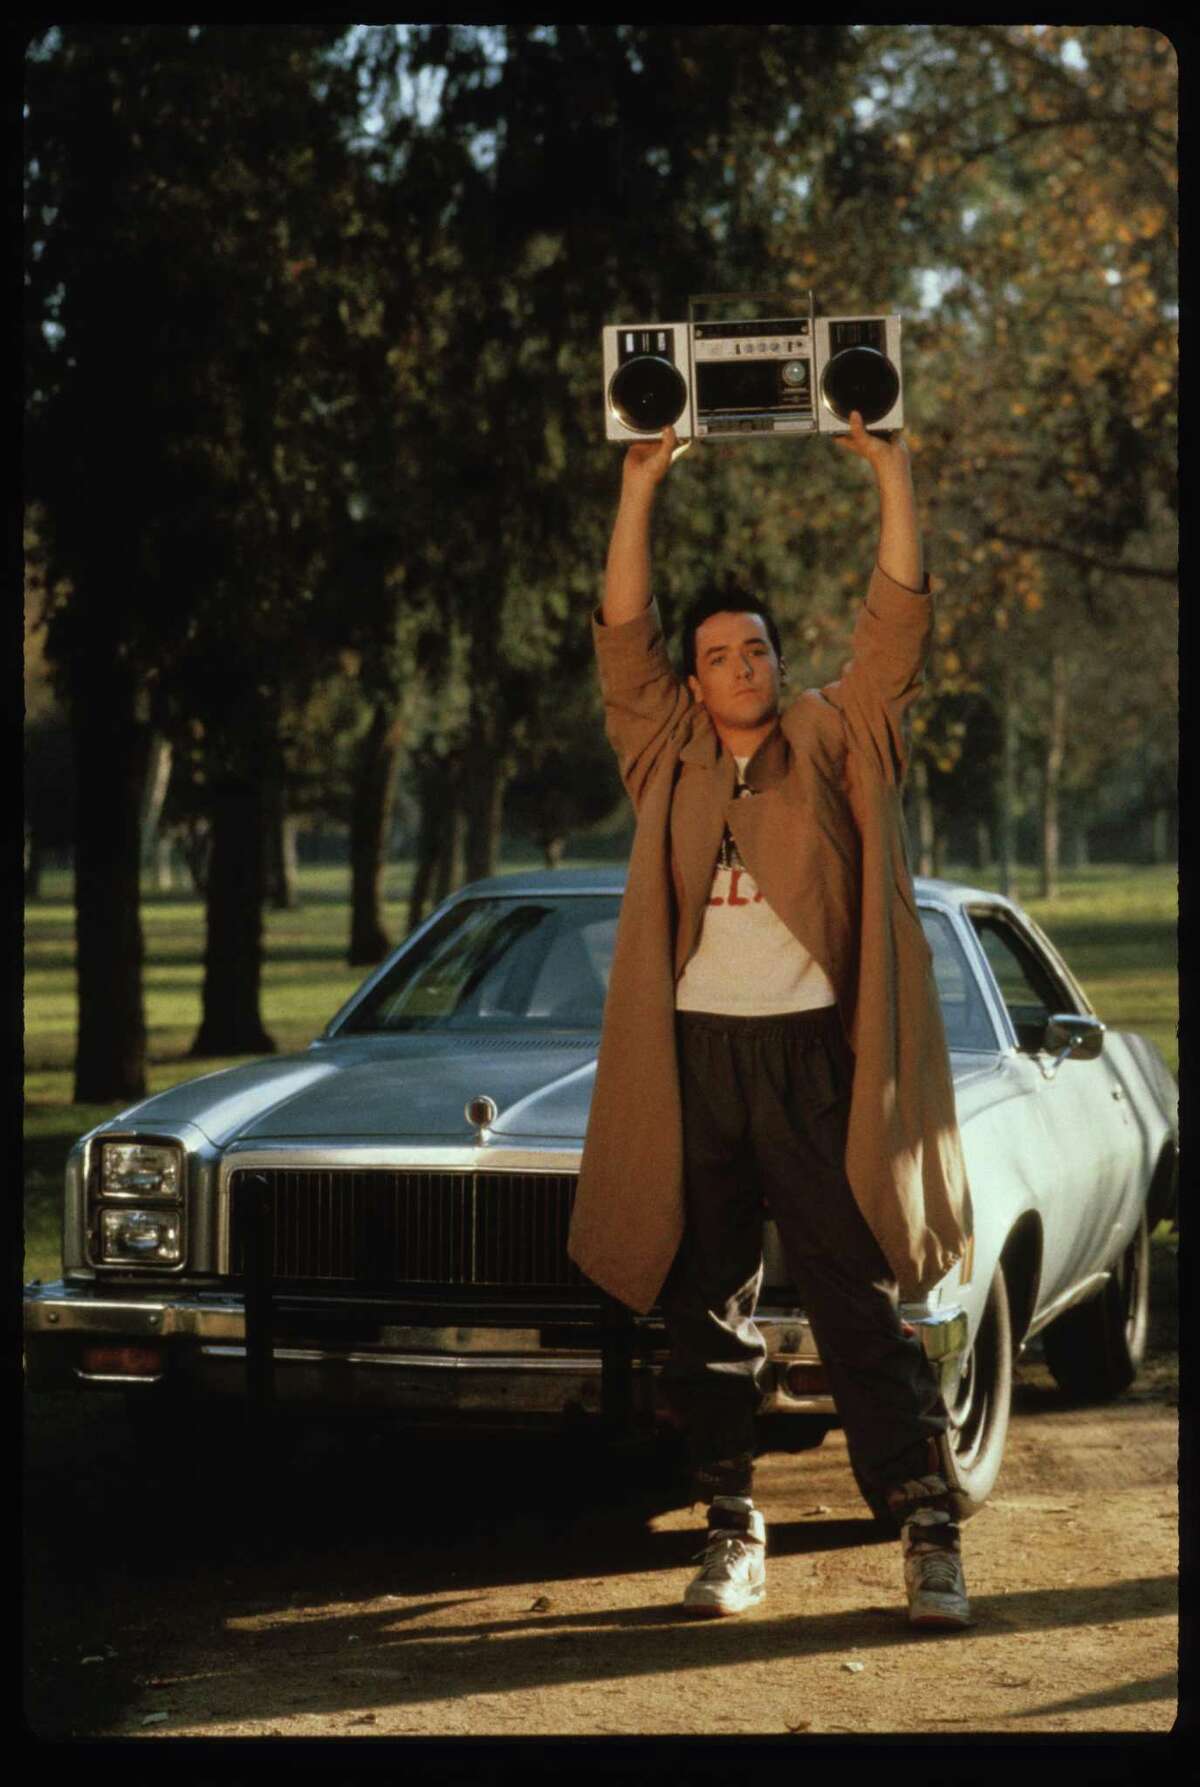 John Cusack will chat with fans following a screening of “Say Anything,” his 1989 movie about a guy who devotes the summer after graduation to his dream girlfriend. Fans can talk to him about anything, he said: “They don’t have to ask just about ‘Say Anything.’ They can ask me whatever they want.”